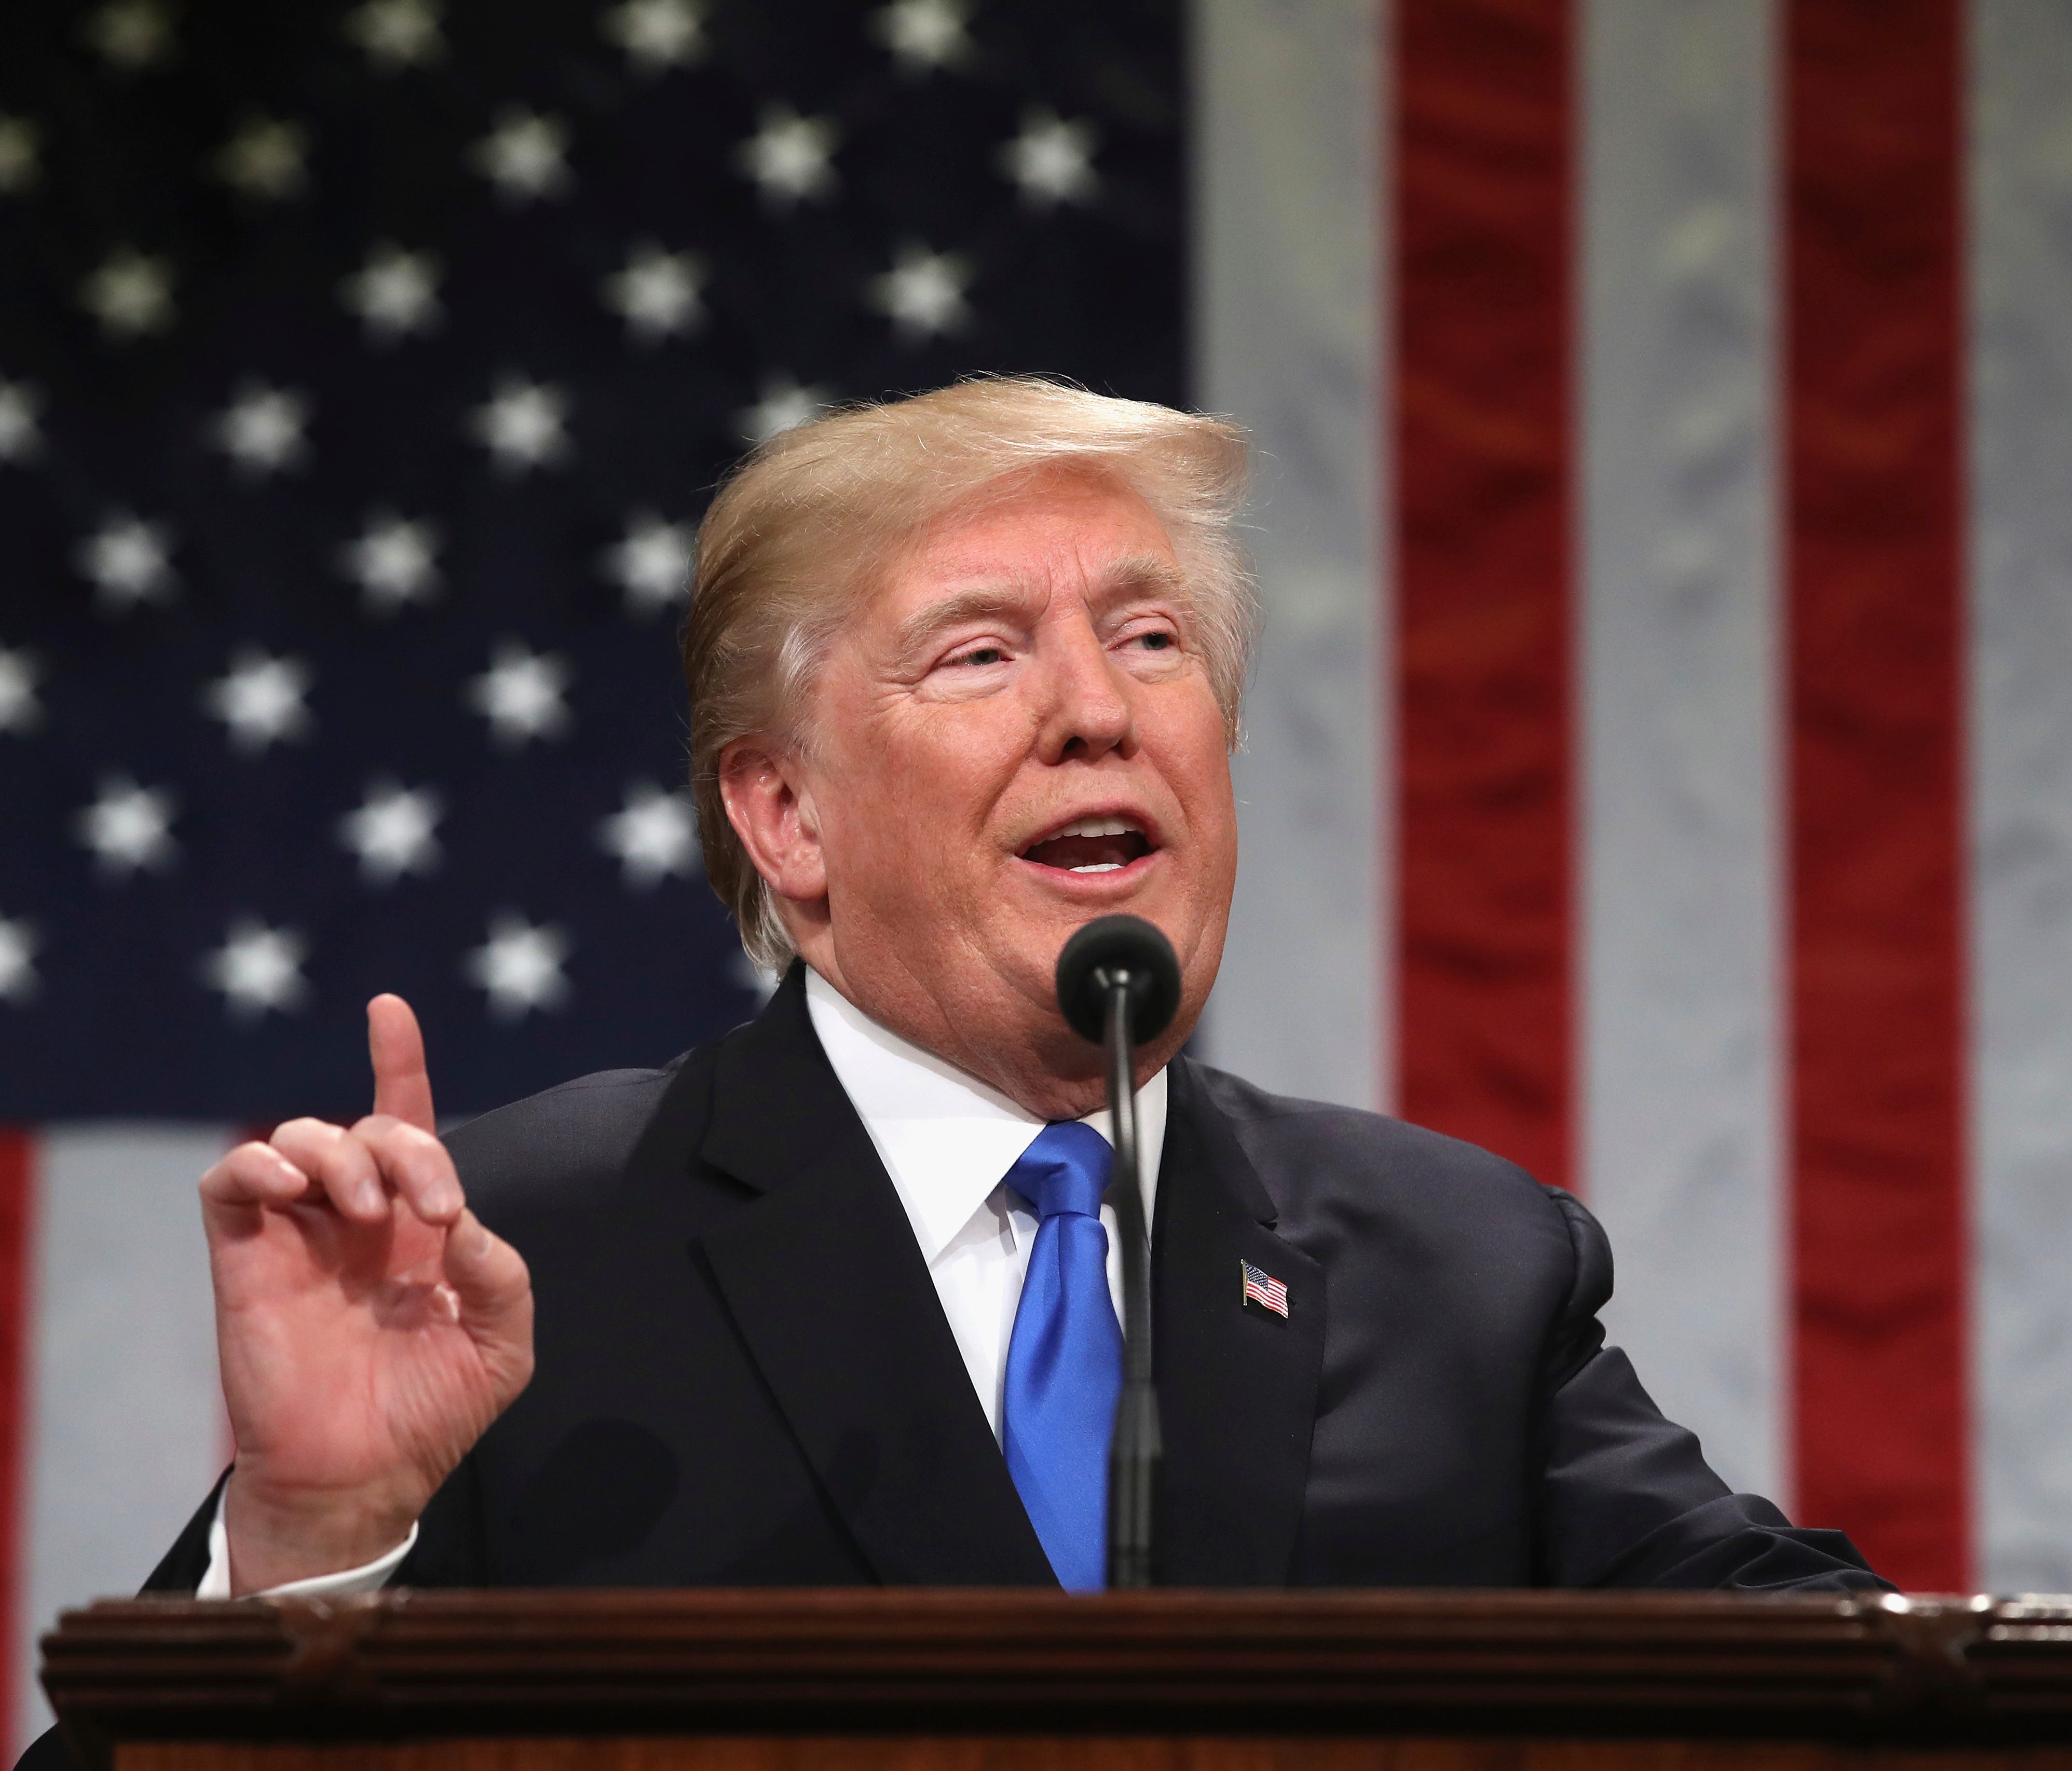 President Donald Trump delivers his first State of the Union address in the House chamber of the U.S. Capitol to a joint session of Congress Tuesday, Jan. 30, 2018 in Washington. (Win McNamee/Pool via AP)